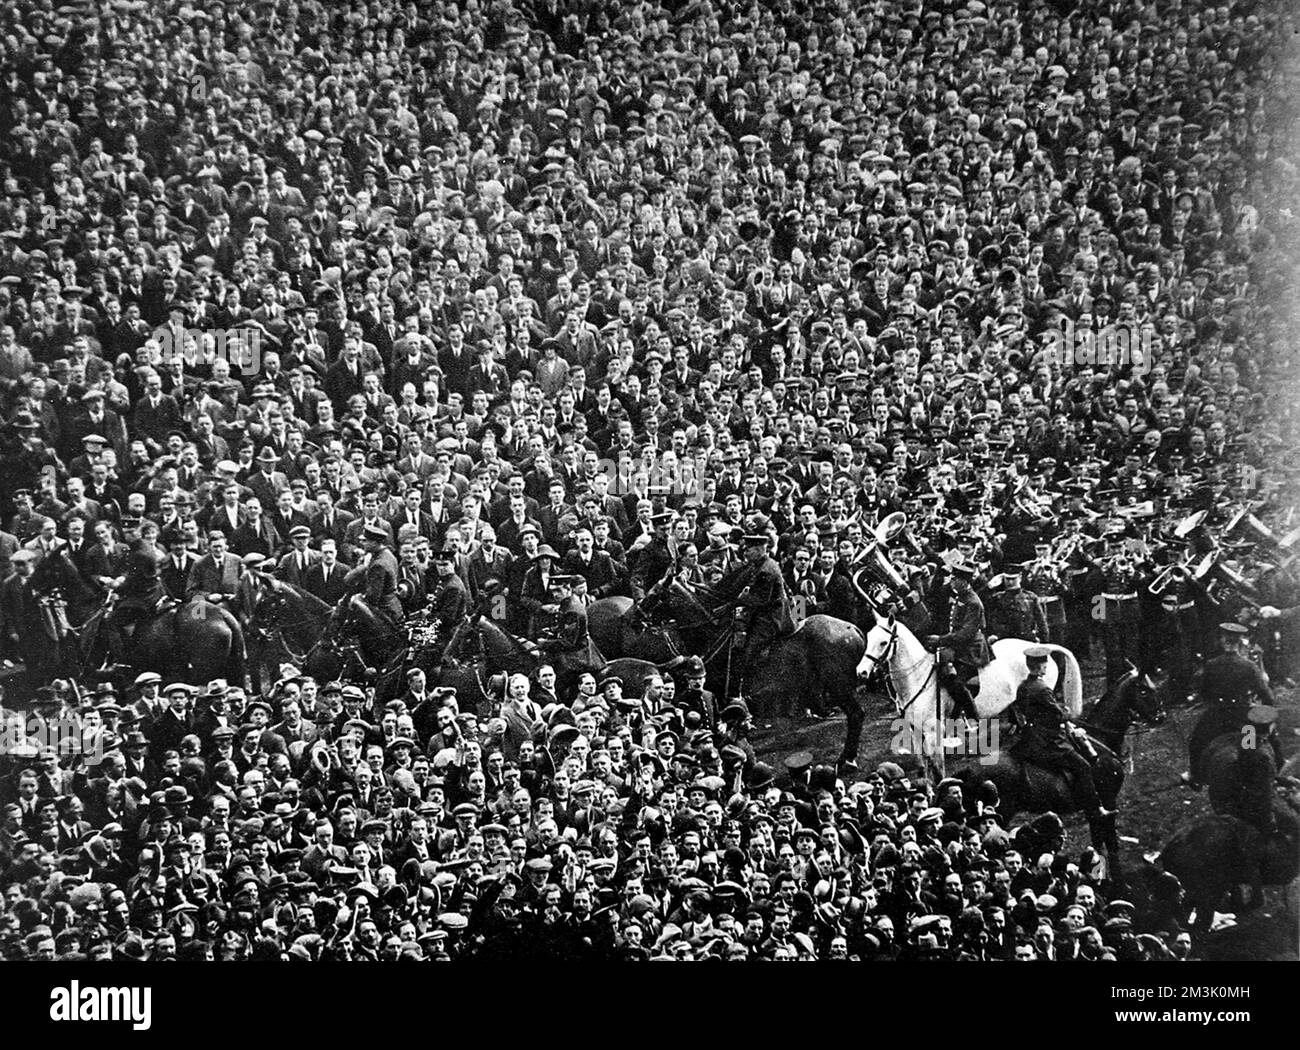 The crowd at Wembley Stadium before the start of the 1923 F.A. Cup Final between Bolton Wanderers and West Ham United. This was the first Cup Final held at the then brand-new Wembley Stadium, which had been built in 300 days at a cost of ??750,000.  Before the match began a crowd of about 100,000 (most without a ticket) stormed through the gates and into the stadium. This meant that there was approximately 200,000 people in a ground designed for 127,000.   The photograph shows the scene as the Band (on right) play the National Anthem and the few mounted policemen attempt to maintain order. Pro Stock Photo